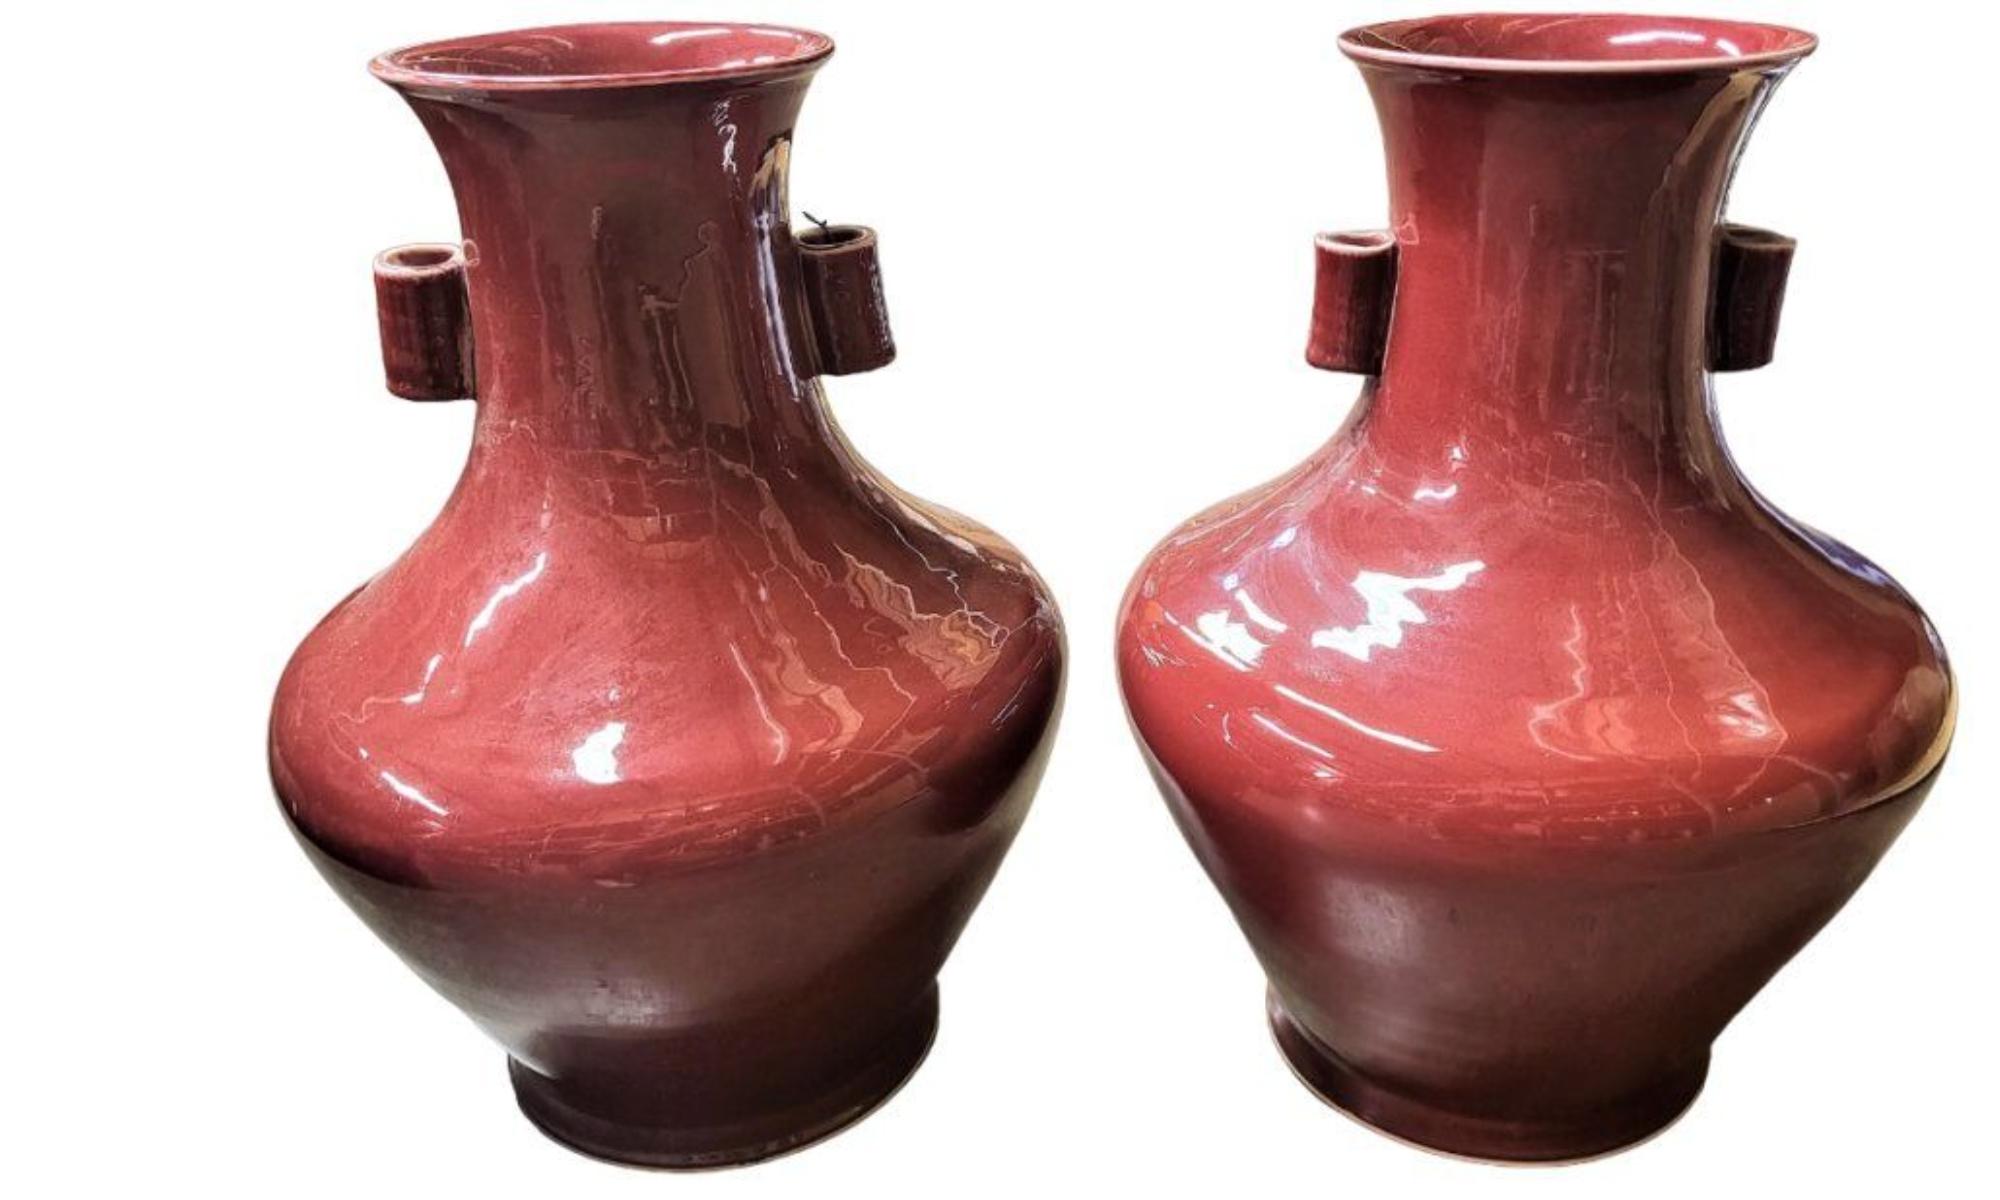 Beautiful large oxblood Chinese vases.They are 22